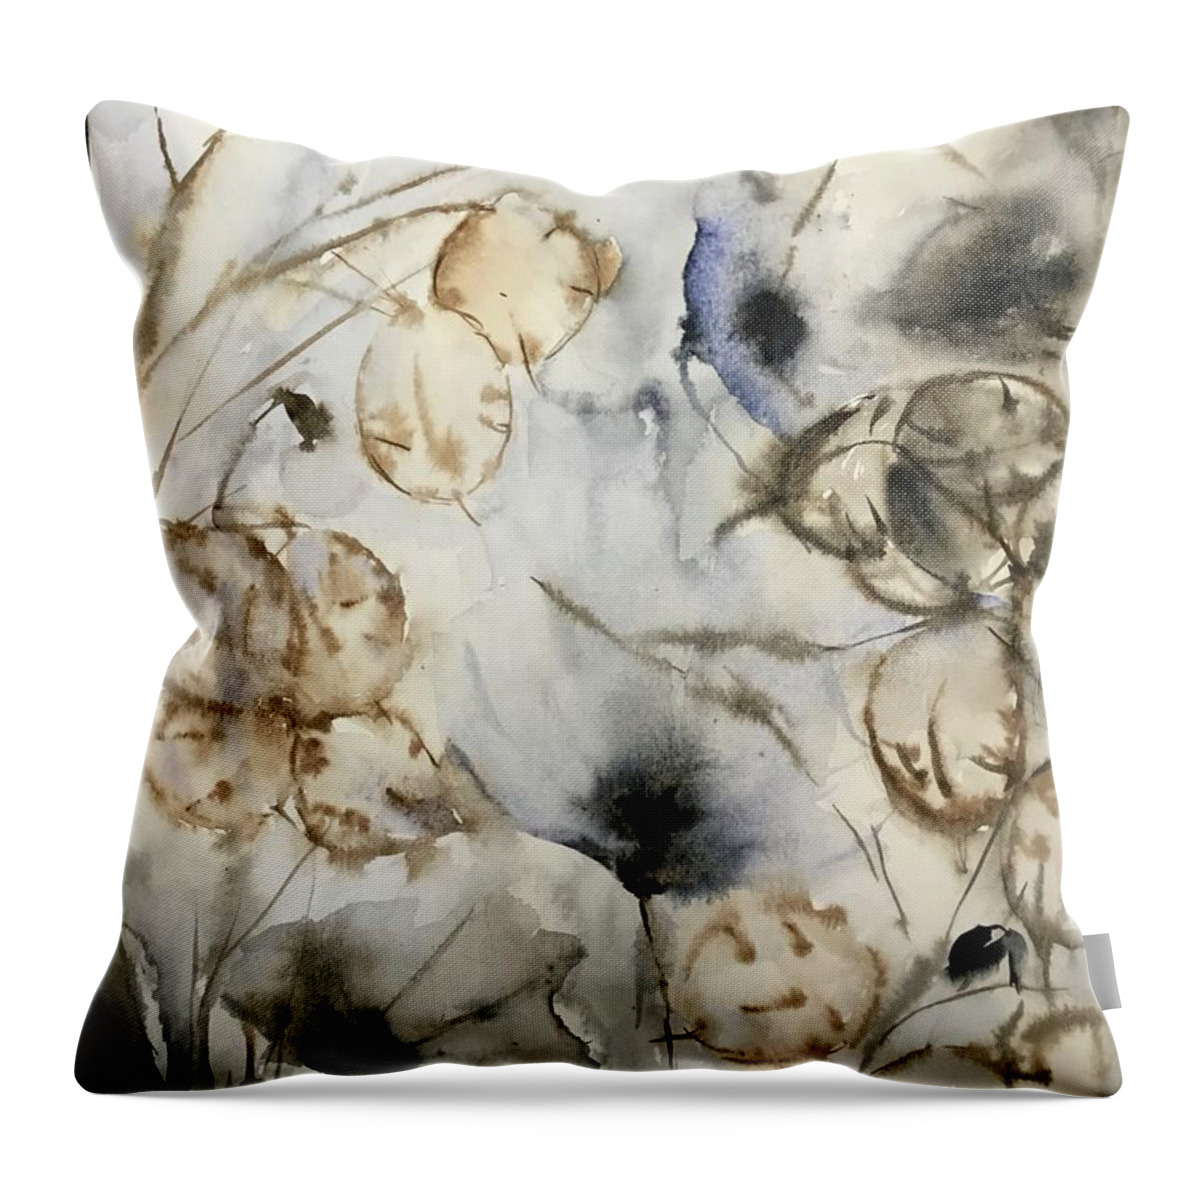 3842020 Throw Pillow featuring the painting 3842020 by Han in Huang wong